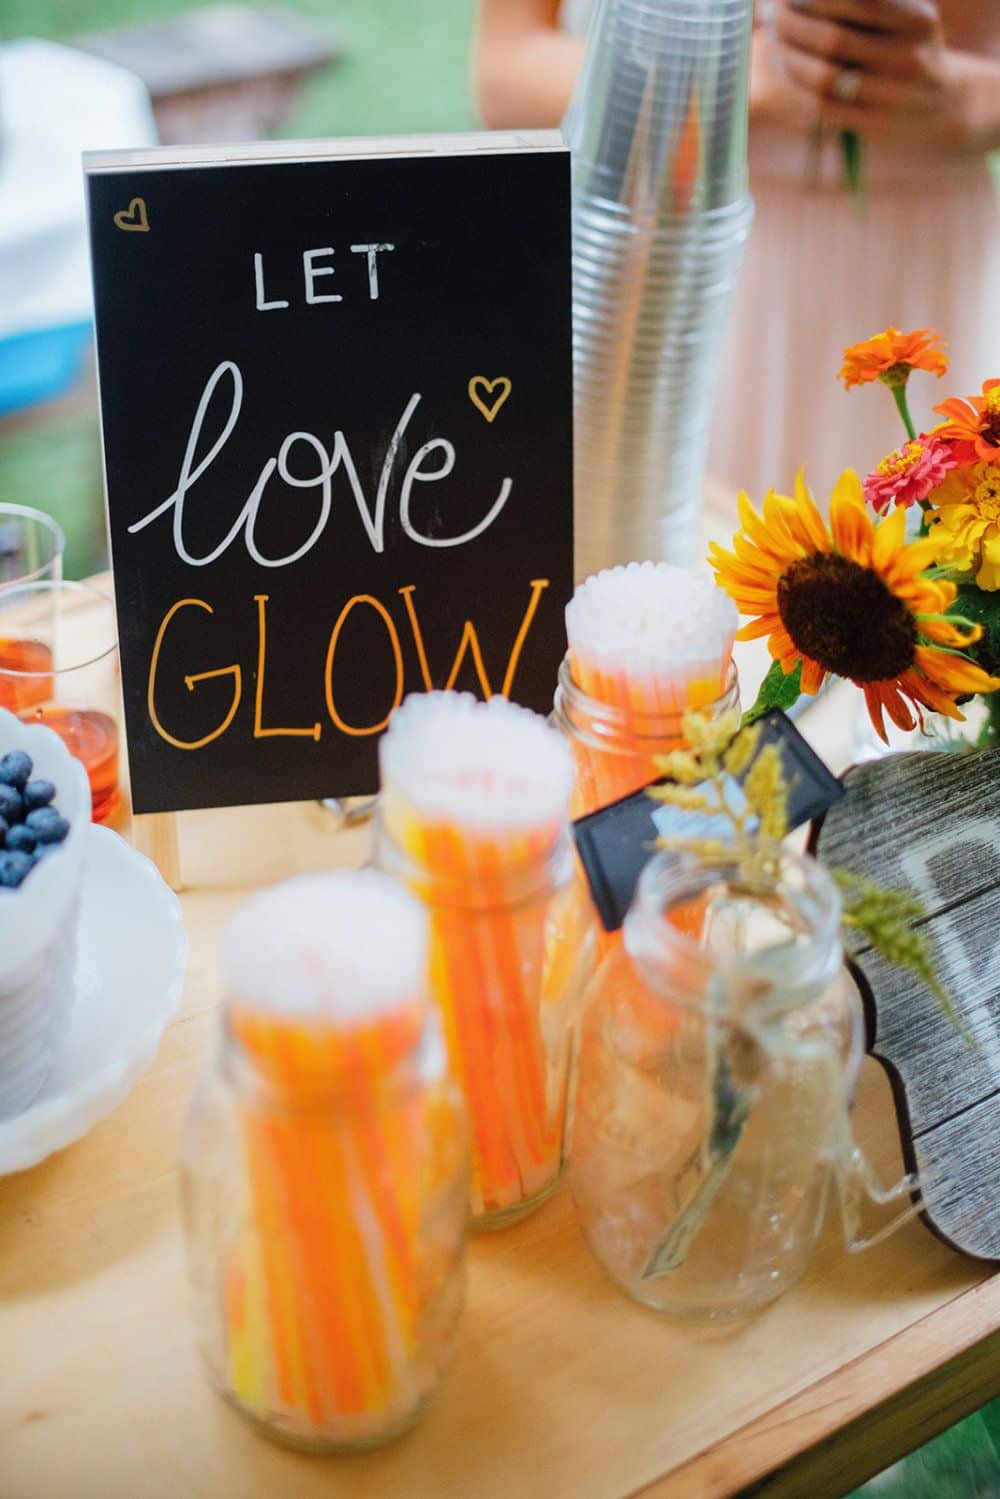 A chalkboards sign that reads "Let Love Glow" is set on a table with Mason Jars of glow sticks.